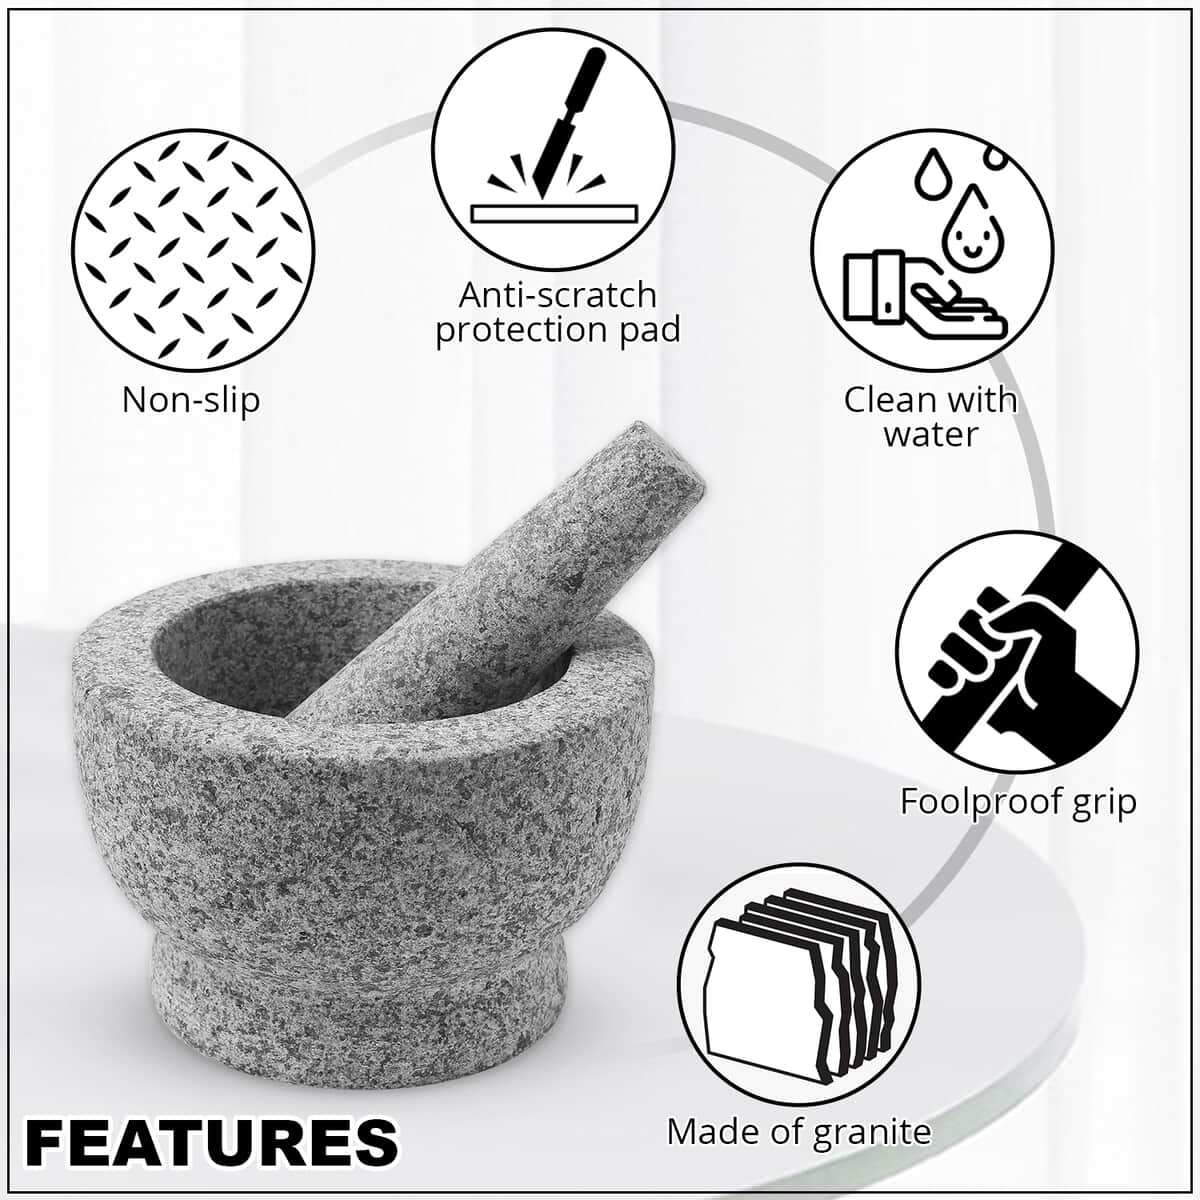 ChefSofi-Mortar and Pestle image number 2